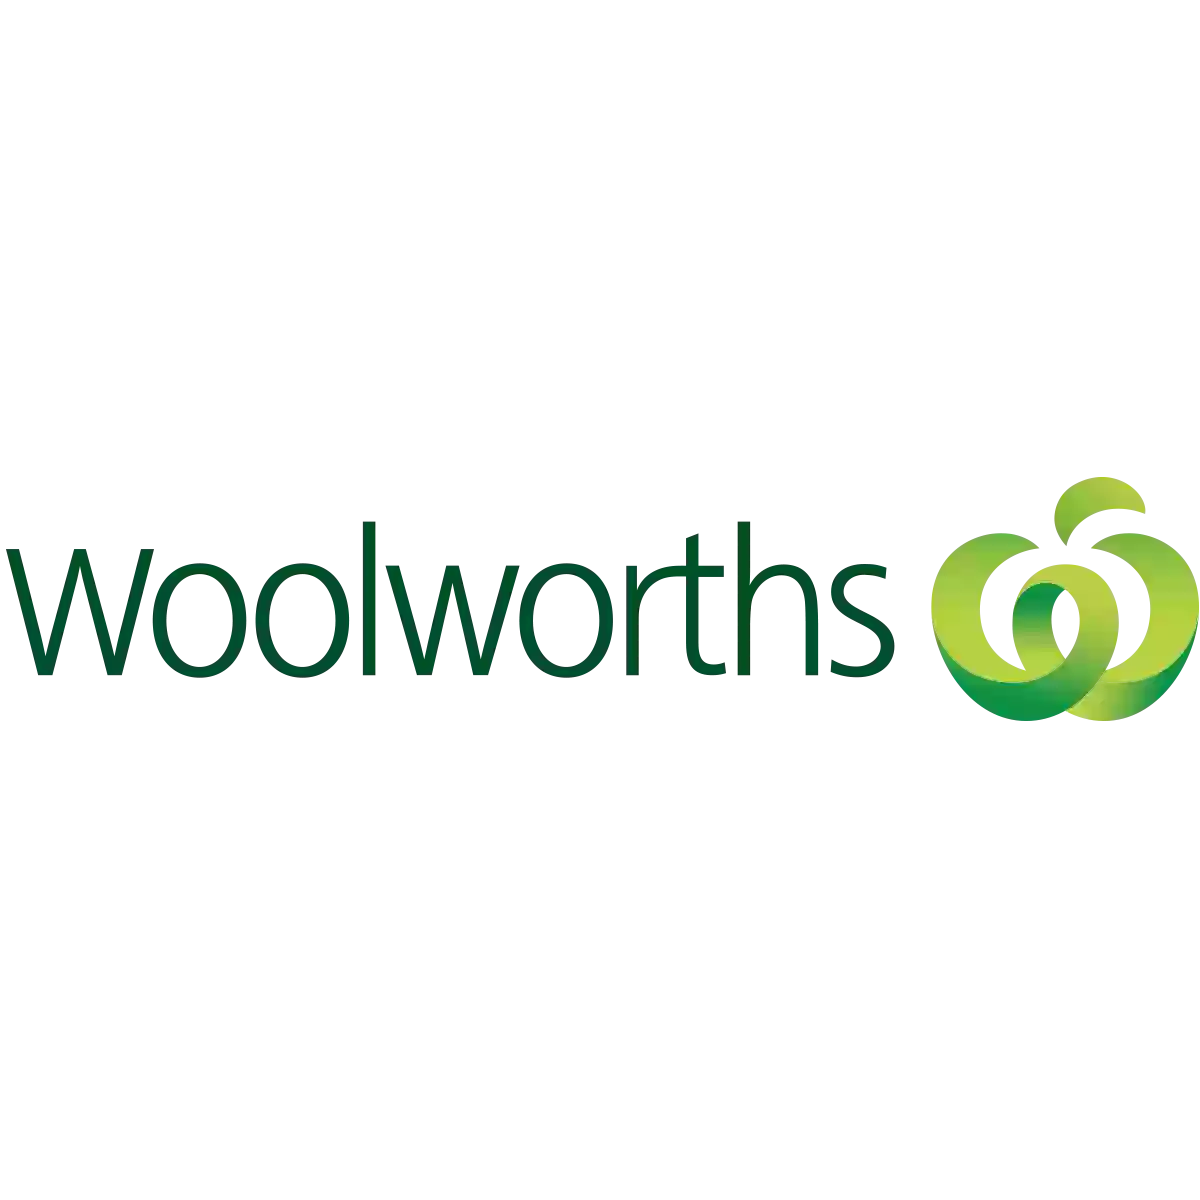 Woolworths Warralily